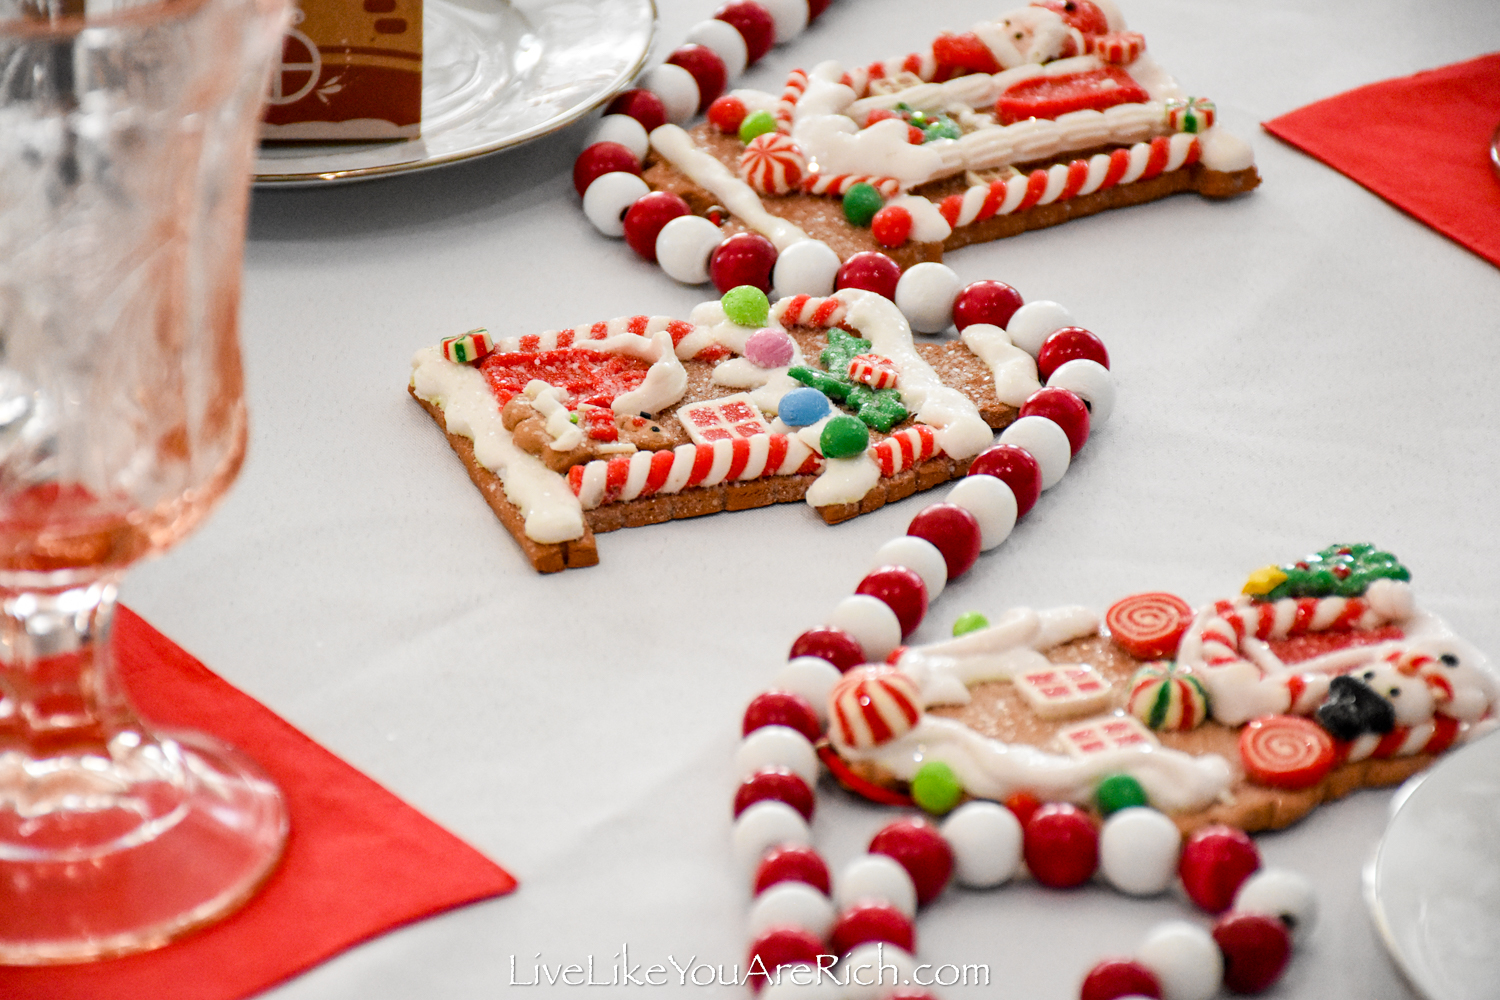 Christmas Tablescape: Gingerbread House